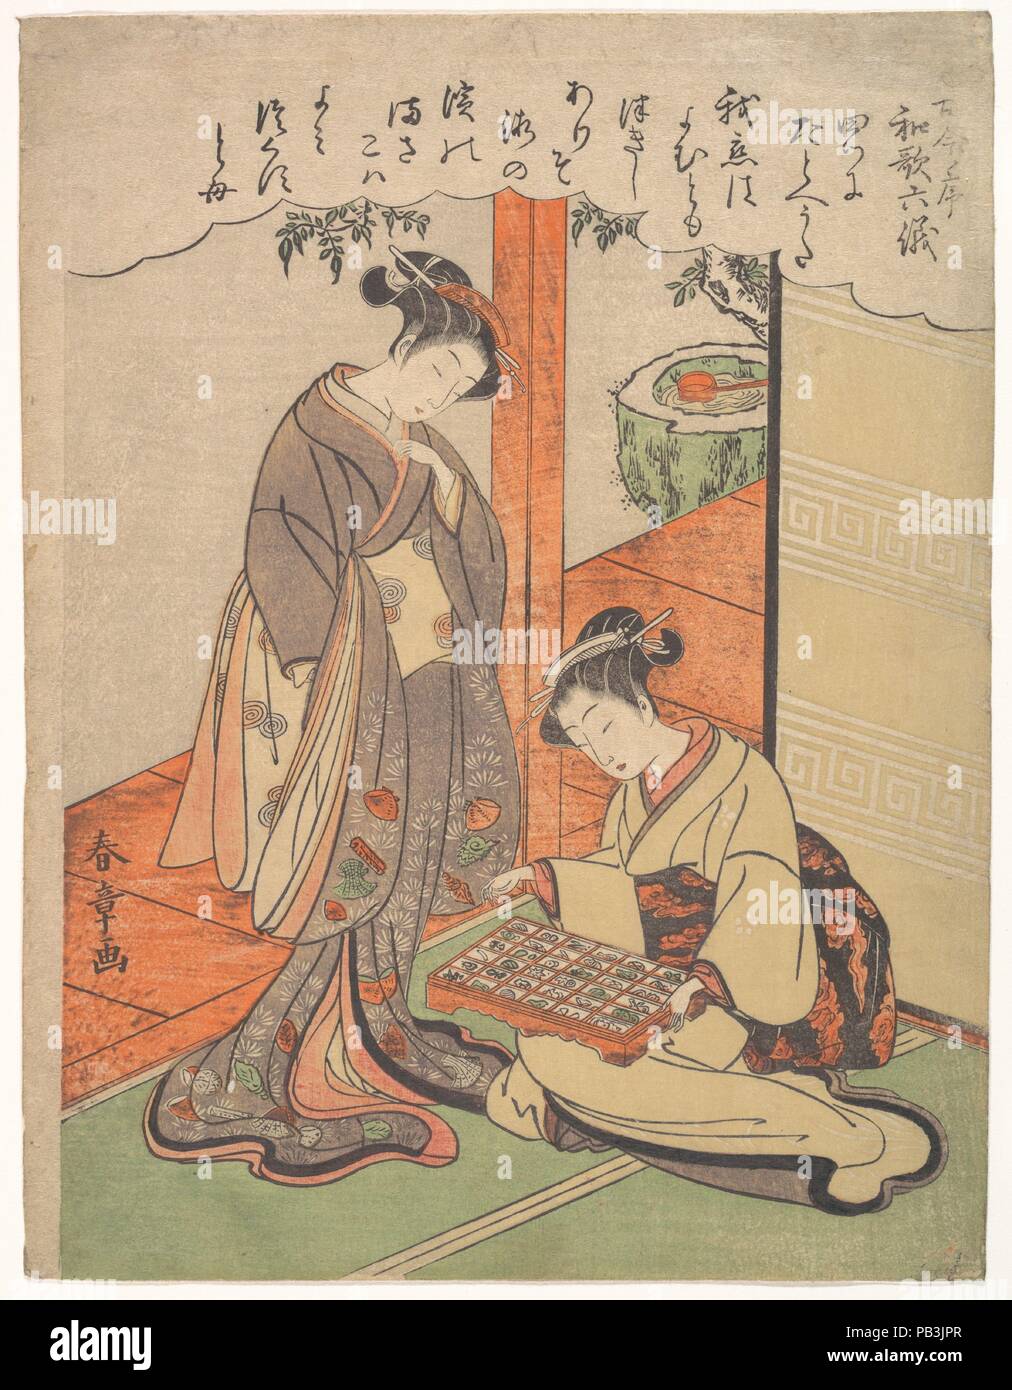 Tatohe uta  Analogy. Artist: Katsukawa Shunsho (Japanese, 1726-1792). Culture: Japan. Dimensions: 10 1/8 x 7 3/4 in. (25.7 x 19.7 cm). Date: late 18th century.  The beauty of Shunsho's print gathers further elegance from two layers of poetic devices--a visual allustion to the imagery in a poem describing a love 'as infinite as the shells upon the shore' and the analogy itself, discussed at length in the preface to the Kokin waka shu. The passage from the preface is quoted in the cloud at the top of the print. The subtle play of meaning between the collecting of shells and the collecting of poe Stock Photo